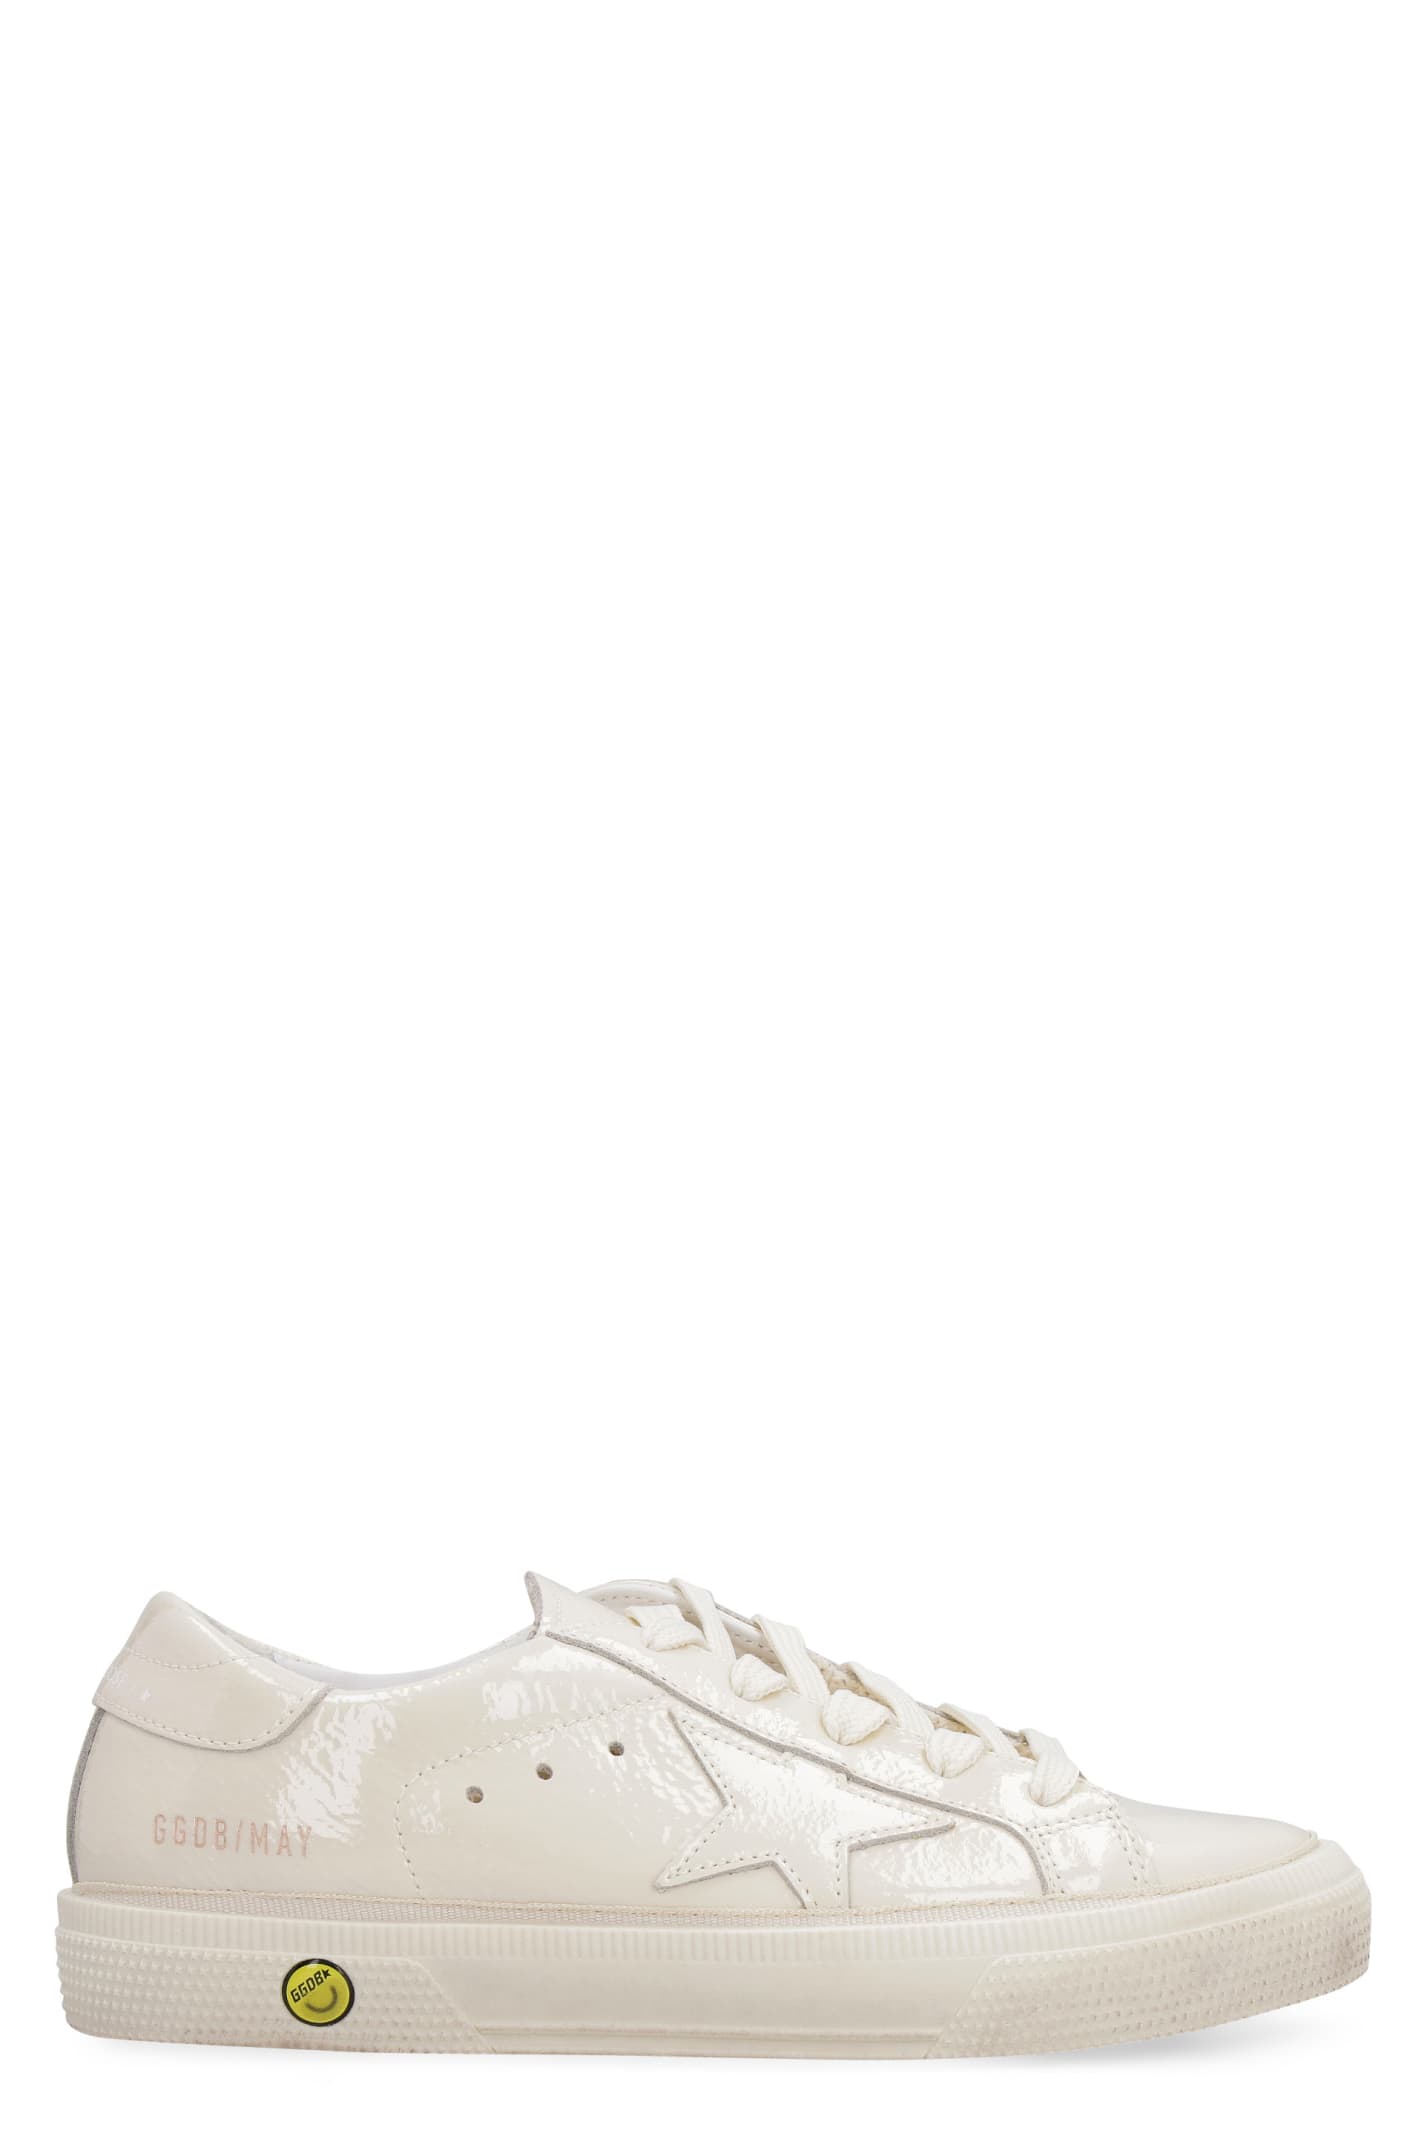 Golden Goose Kids' May Patent Leather Low-top Sneakers In Panna